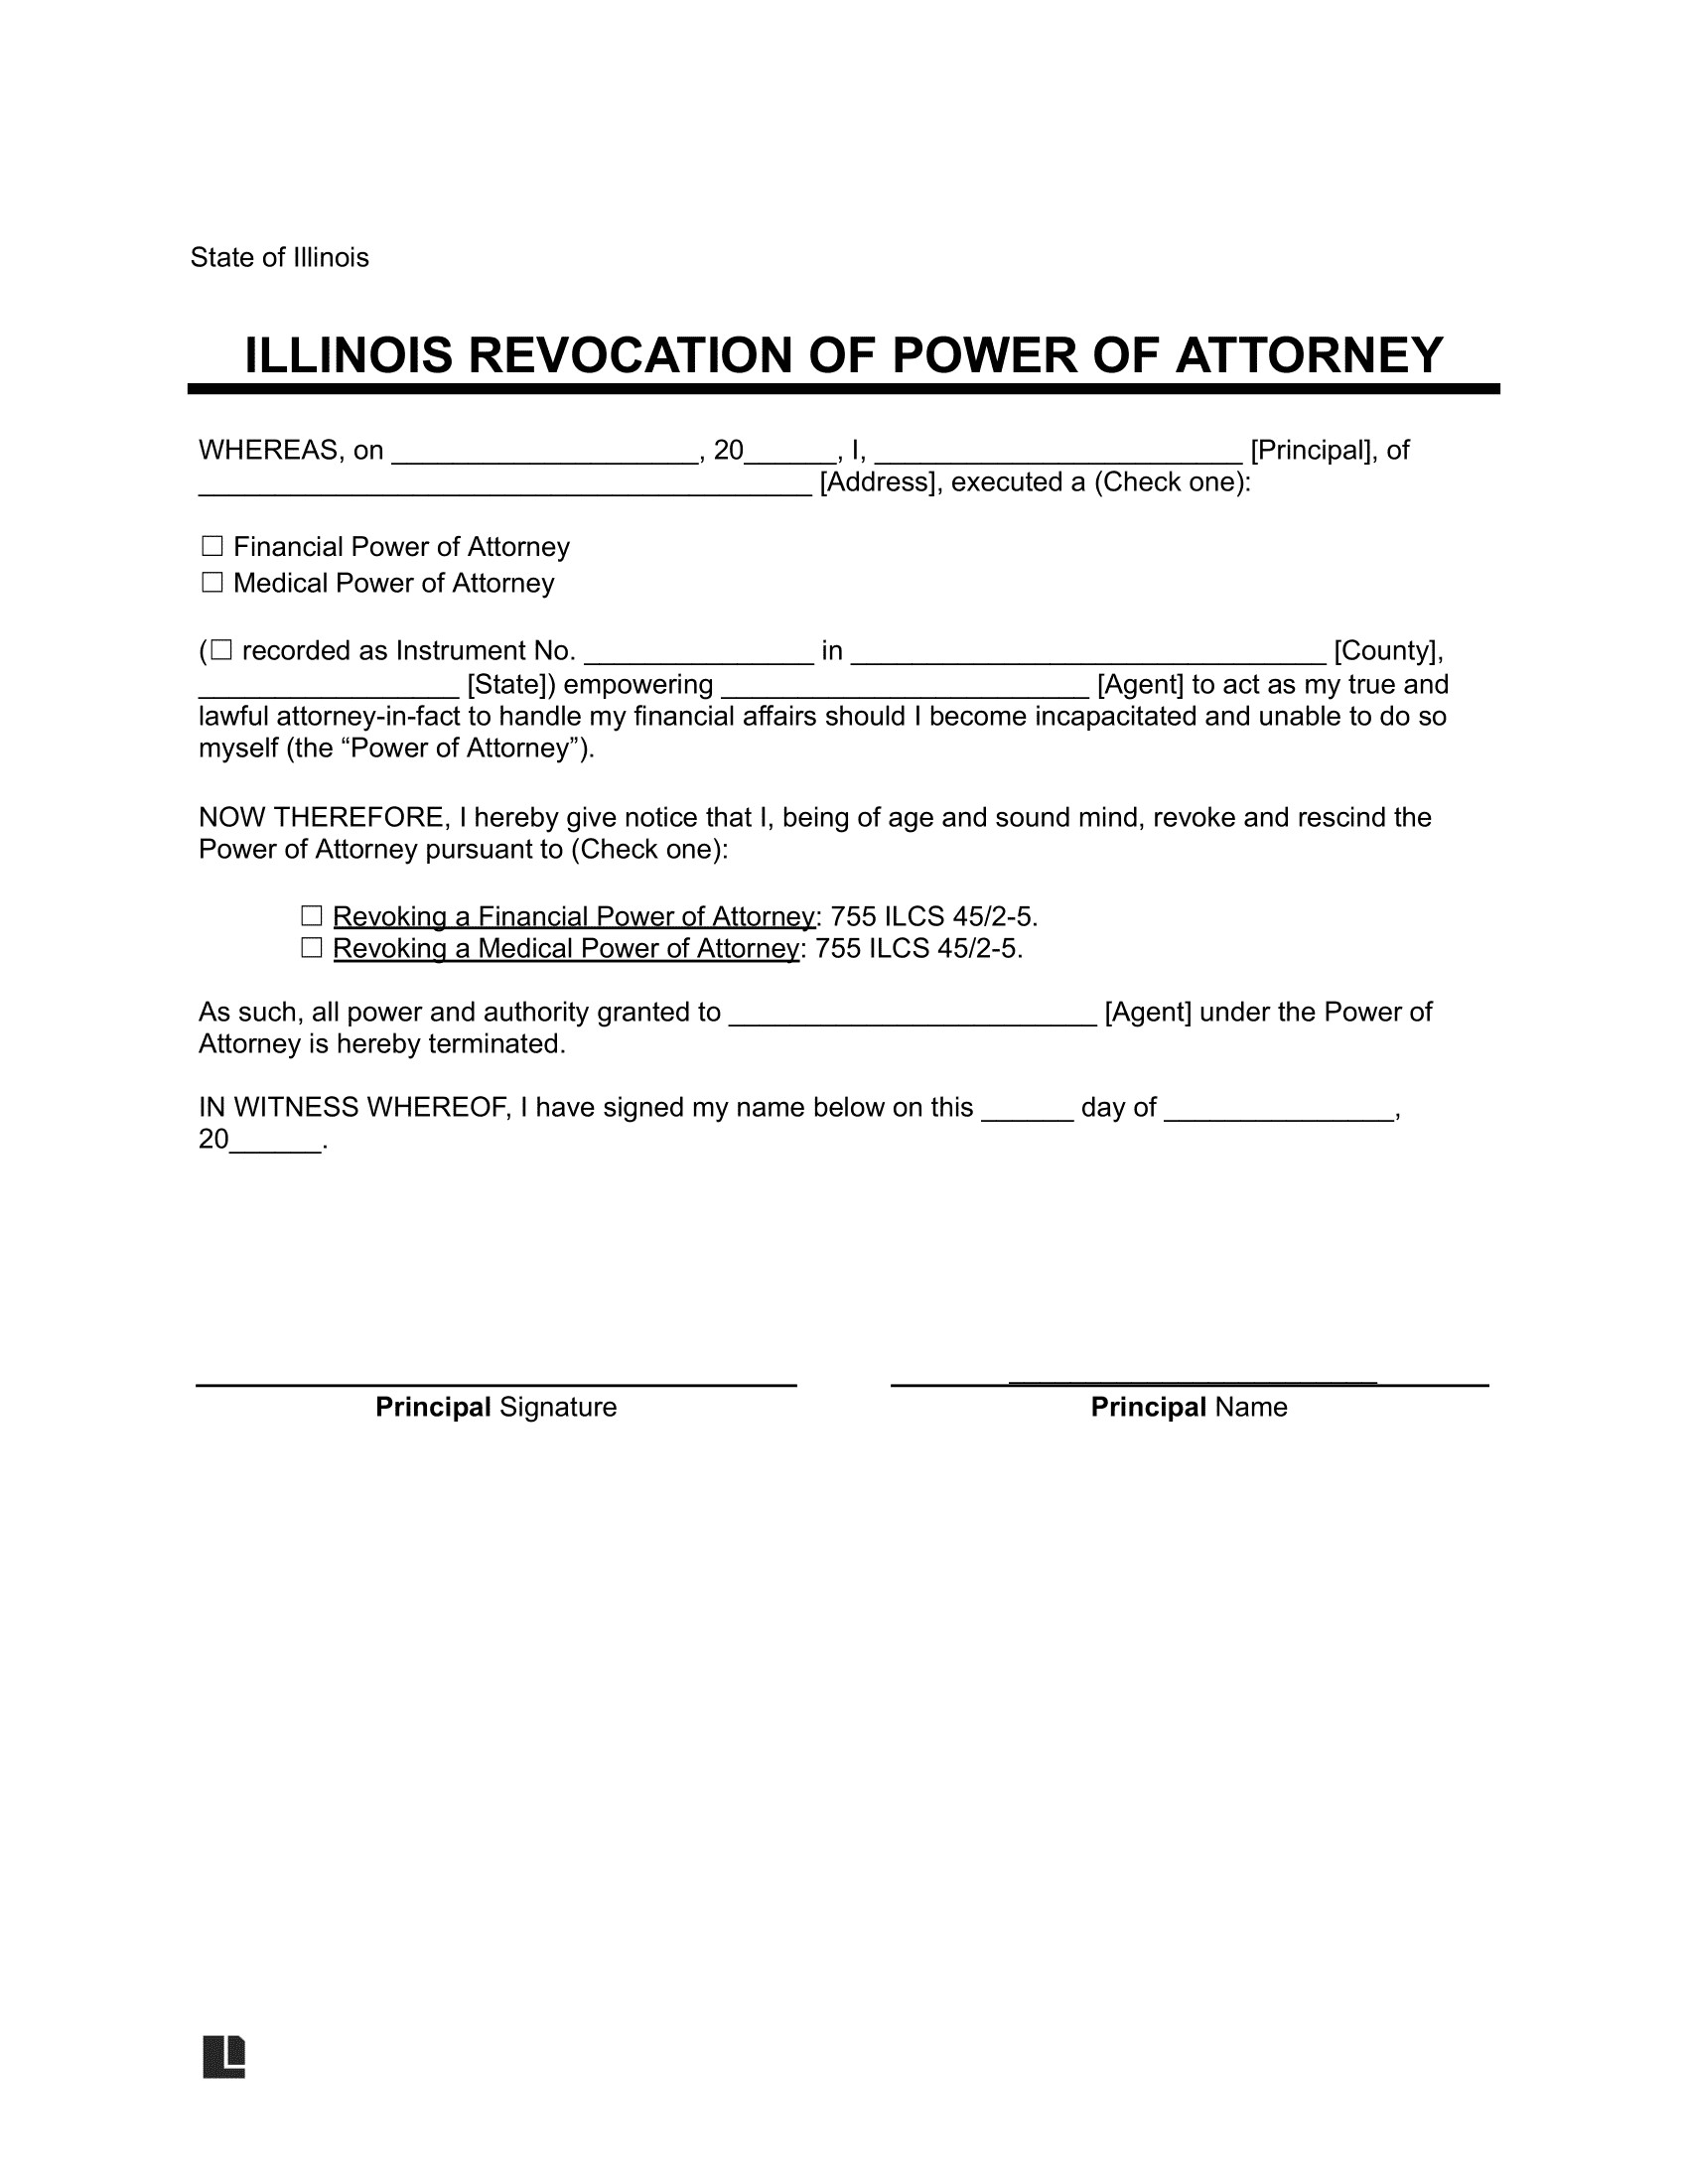 Illinois Revocation of Power of Attorney Form